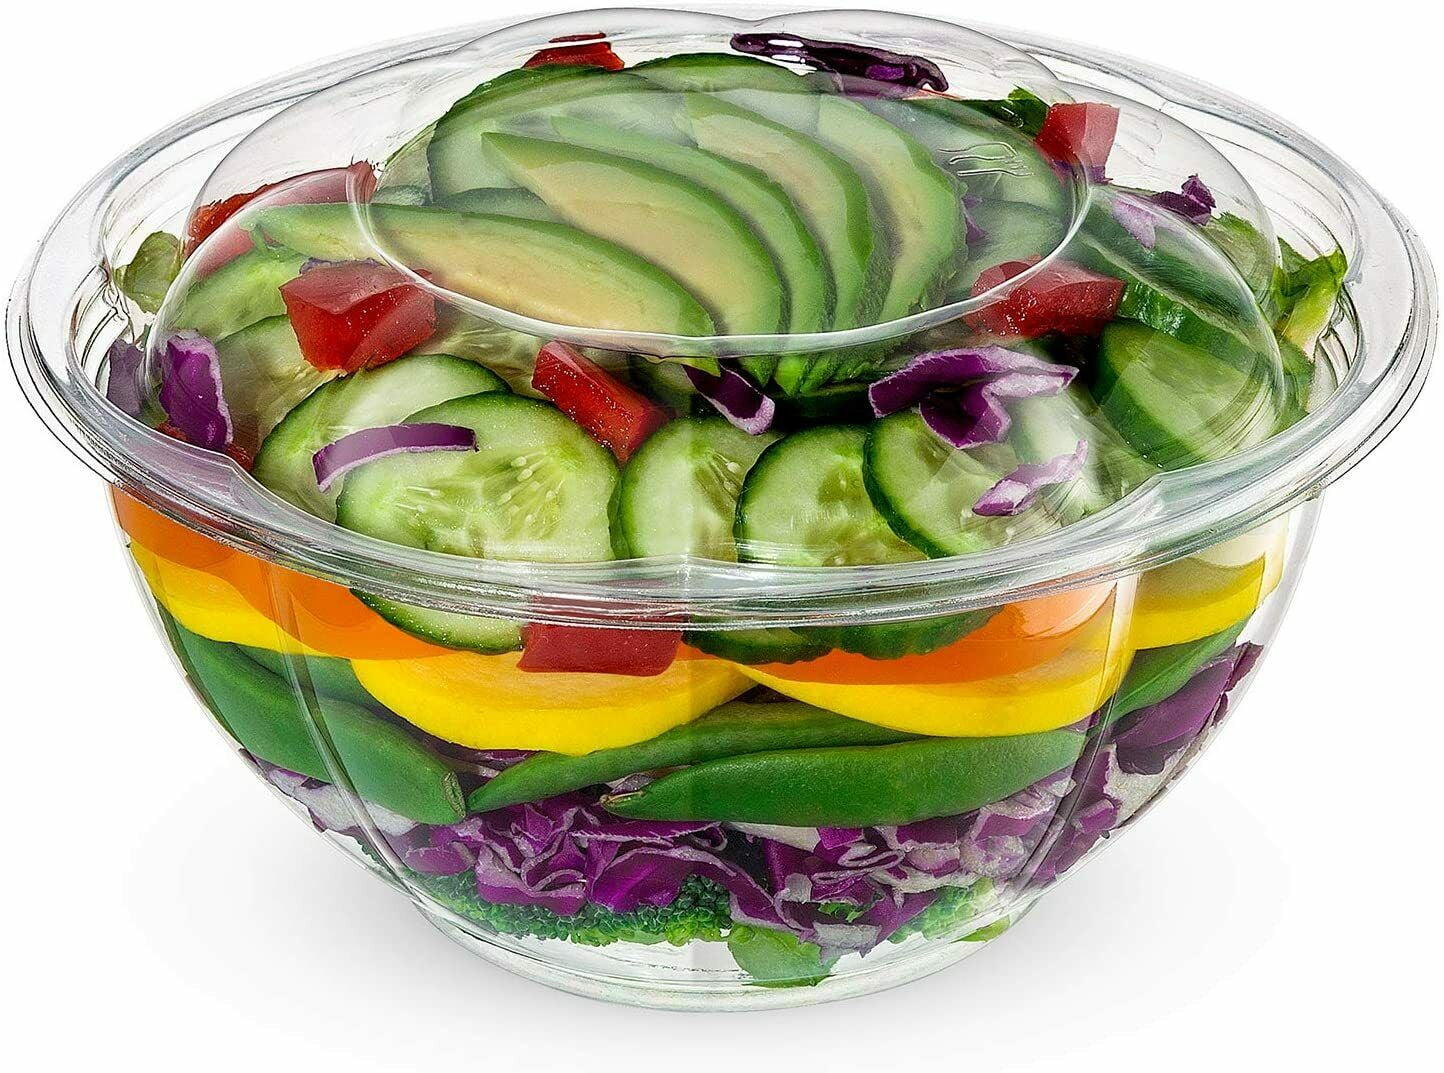 32oz Crystal Clear Plastic Disposable Salad Bowls with Lids To-Go with –  EcoQuality Store